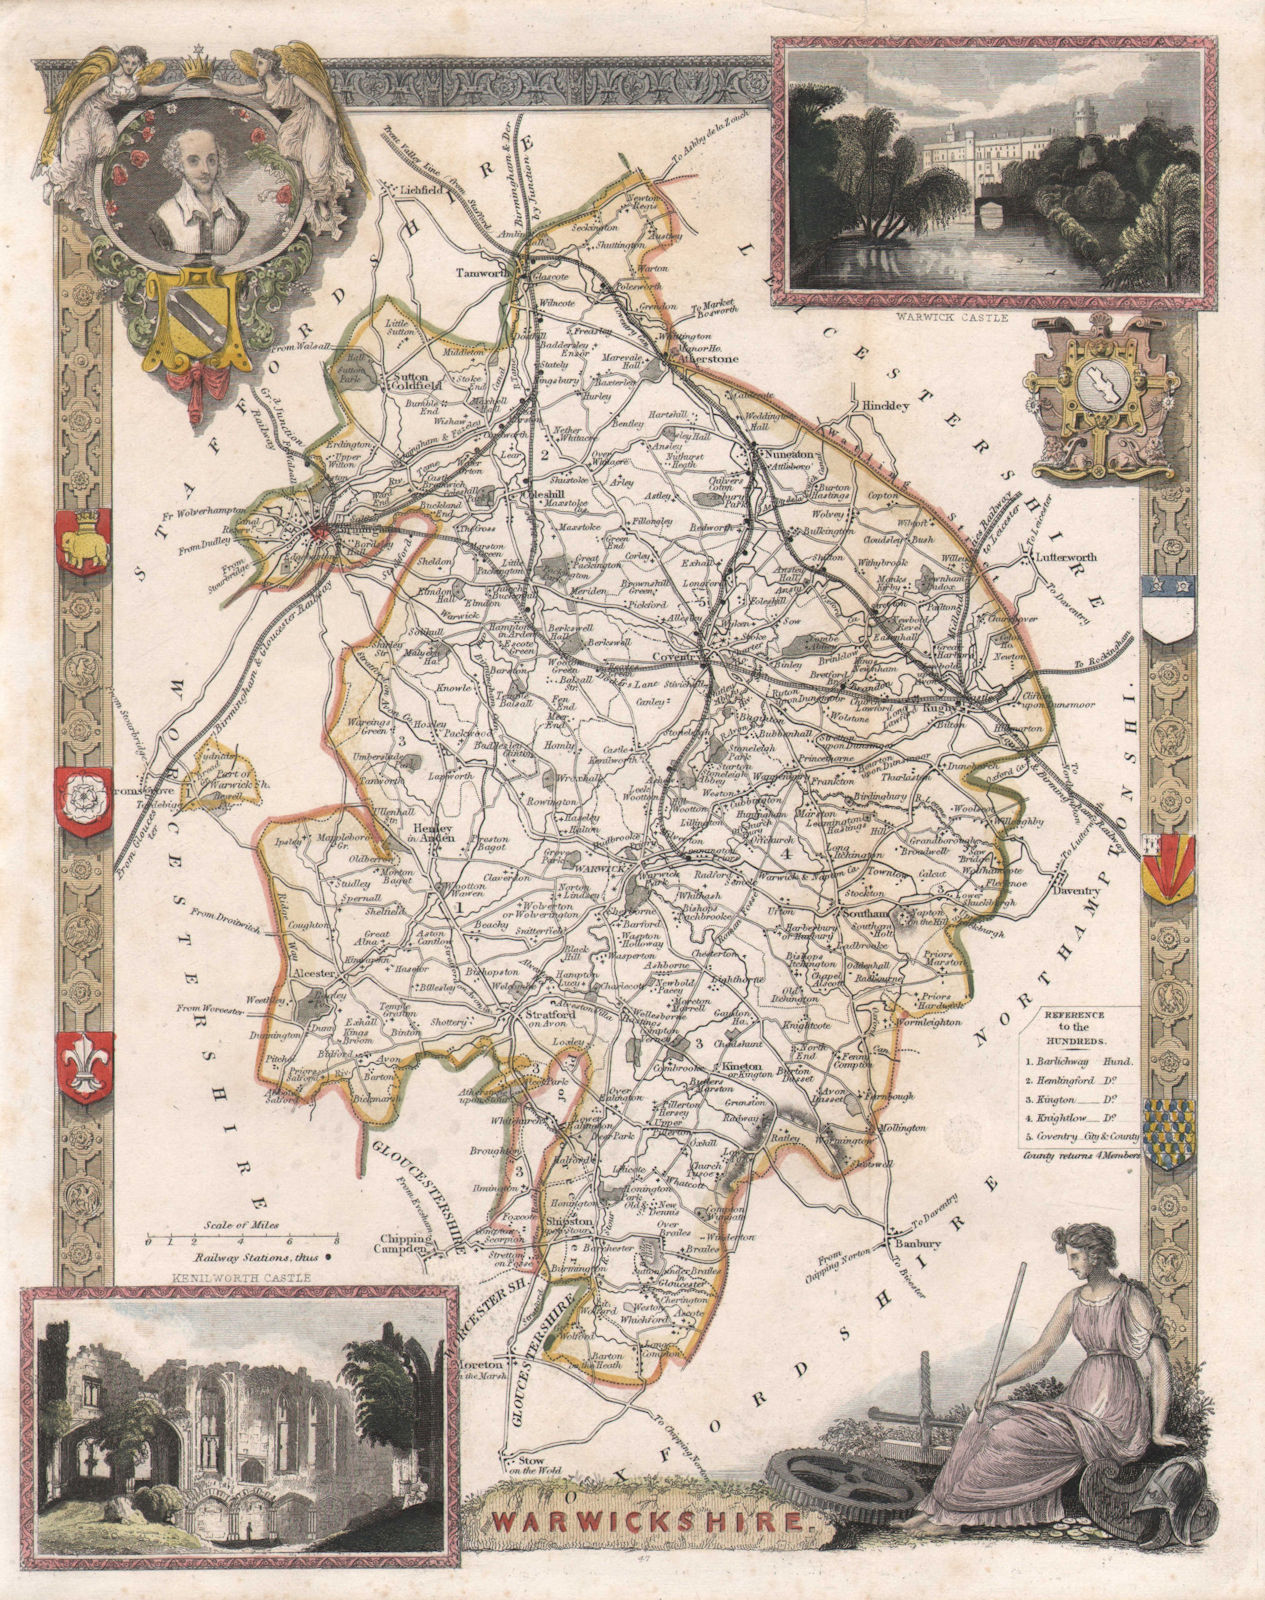 Associate Product Warwickshire antique hand-coloured county map. Railways. MOULE c1840 old